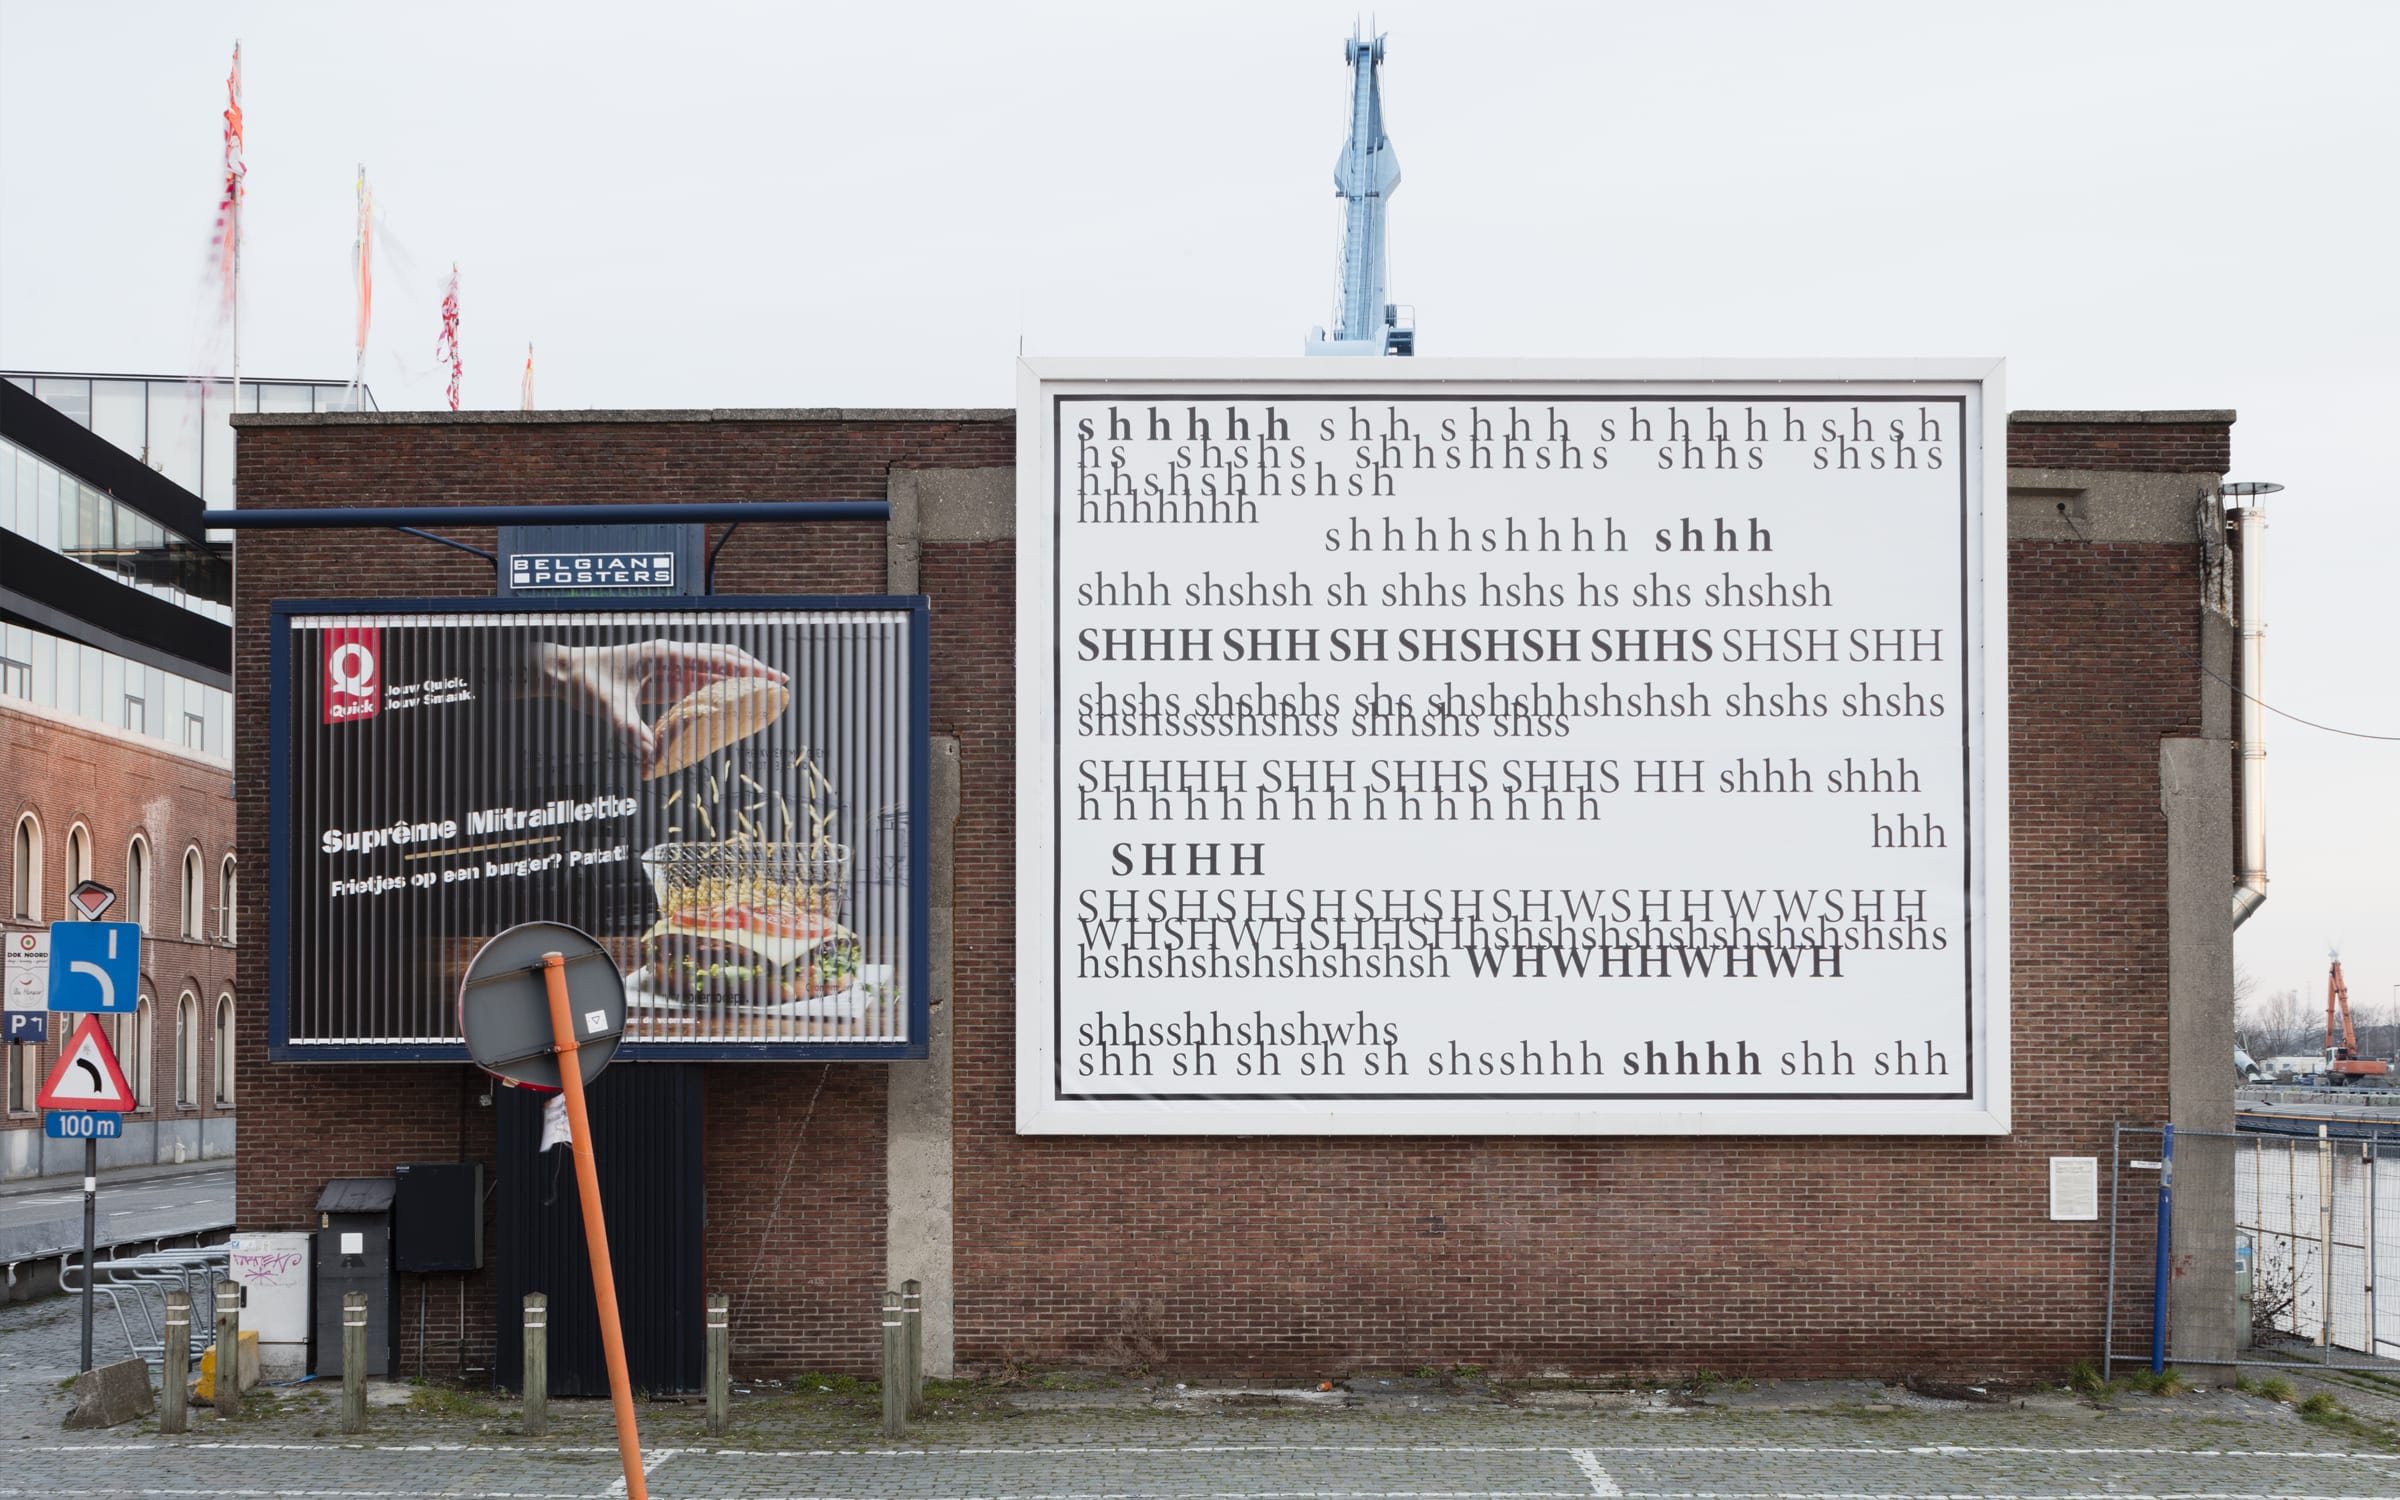 David Horvitz, When the Ocean Sounds (2018), billboard print on front-lit PVC, public installation at the Ghent Harbor for artlead.net’s Billboard Series. Photo by: Michiel De Cleene. Courtesy of the artist and ChertLüdde, Berlin.